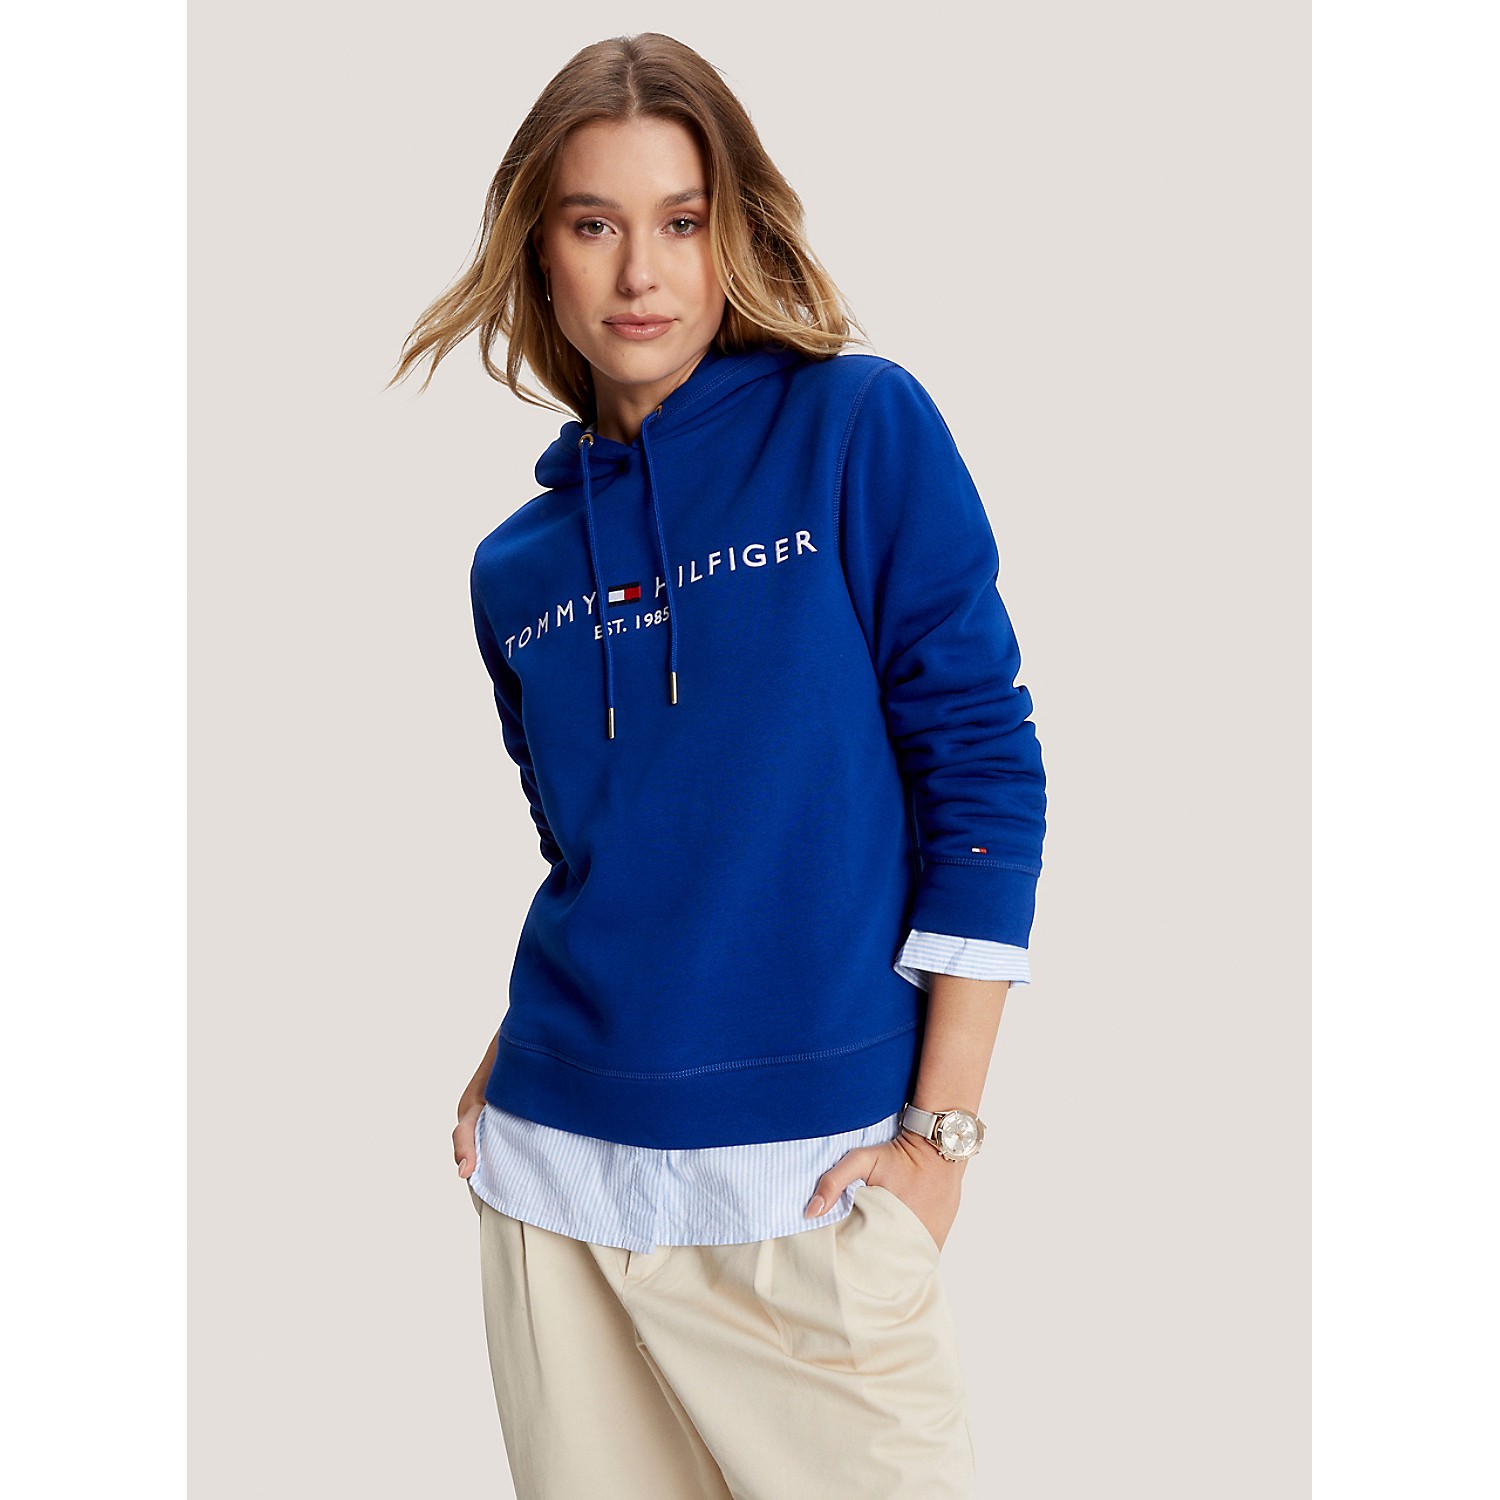 TOMMY HILFIGER Embroidered Tommy Logo Hoodie